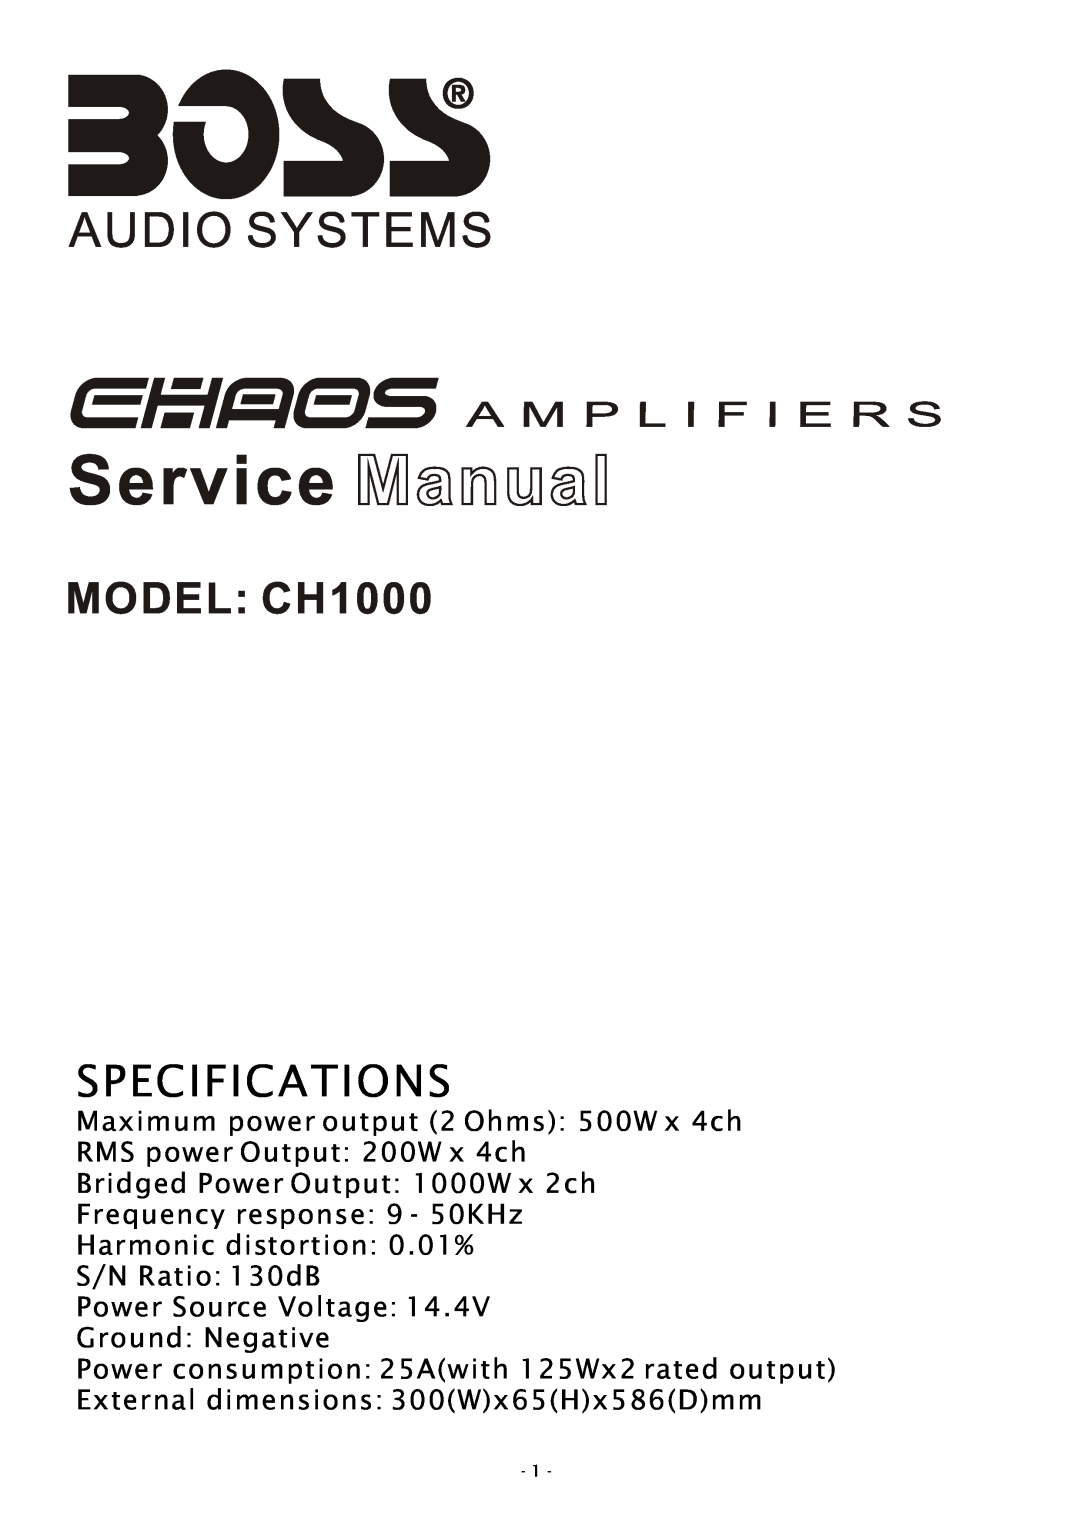 Boss Audio Systems specifications MODEL CH1000, Specifications, External dimensions 300Wx65Hx586Dmm 